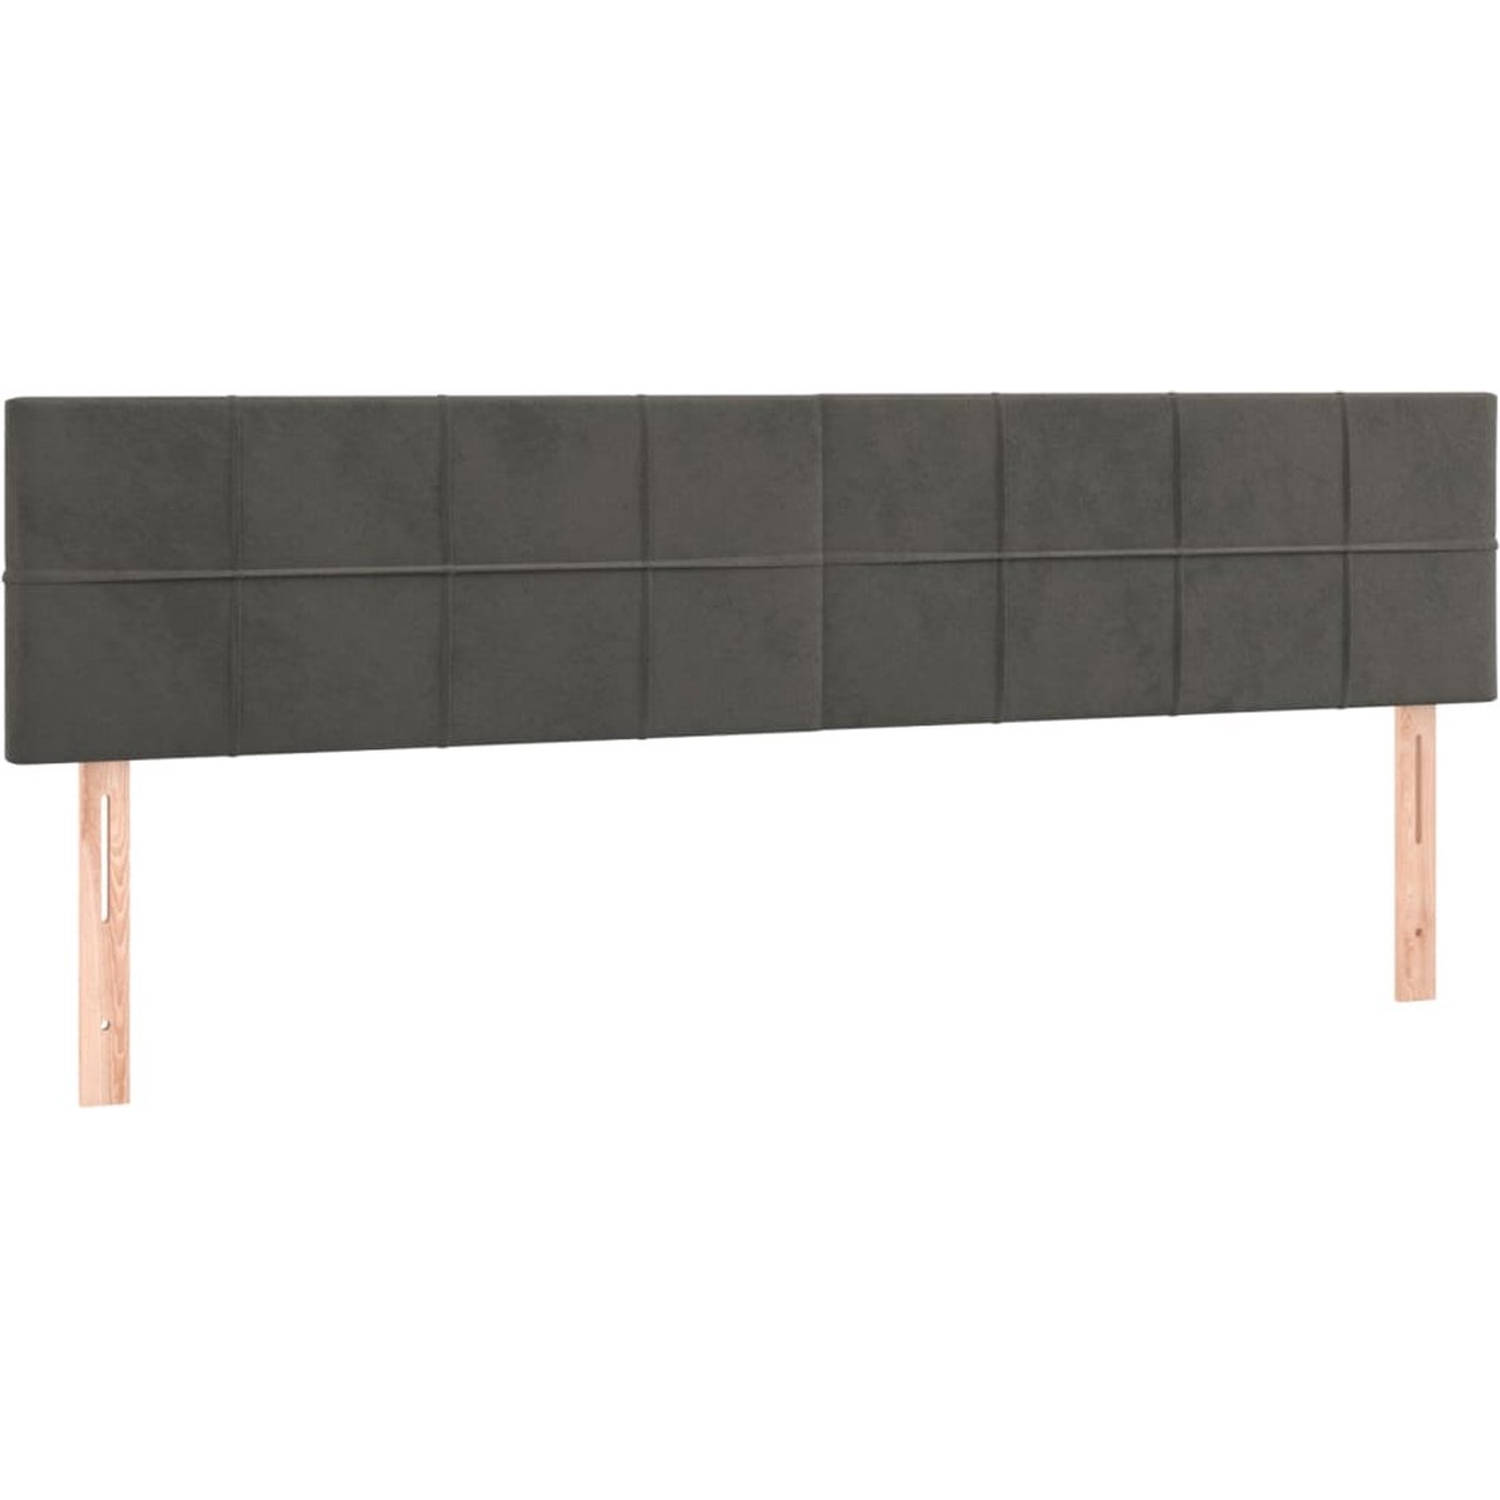 The Living Store Boxspringbed - Comfort - Bed - 160x200 cm - Zacht fluweel